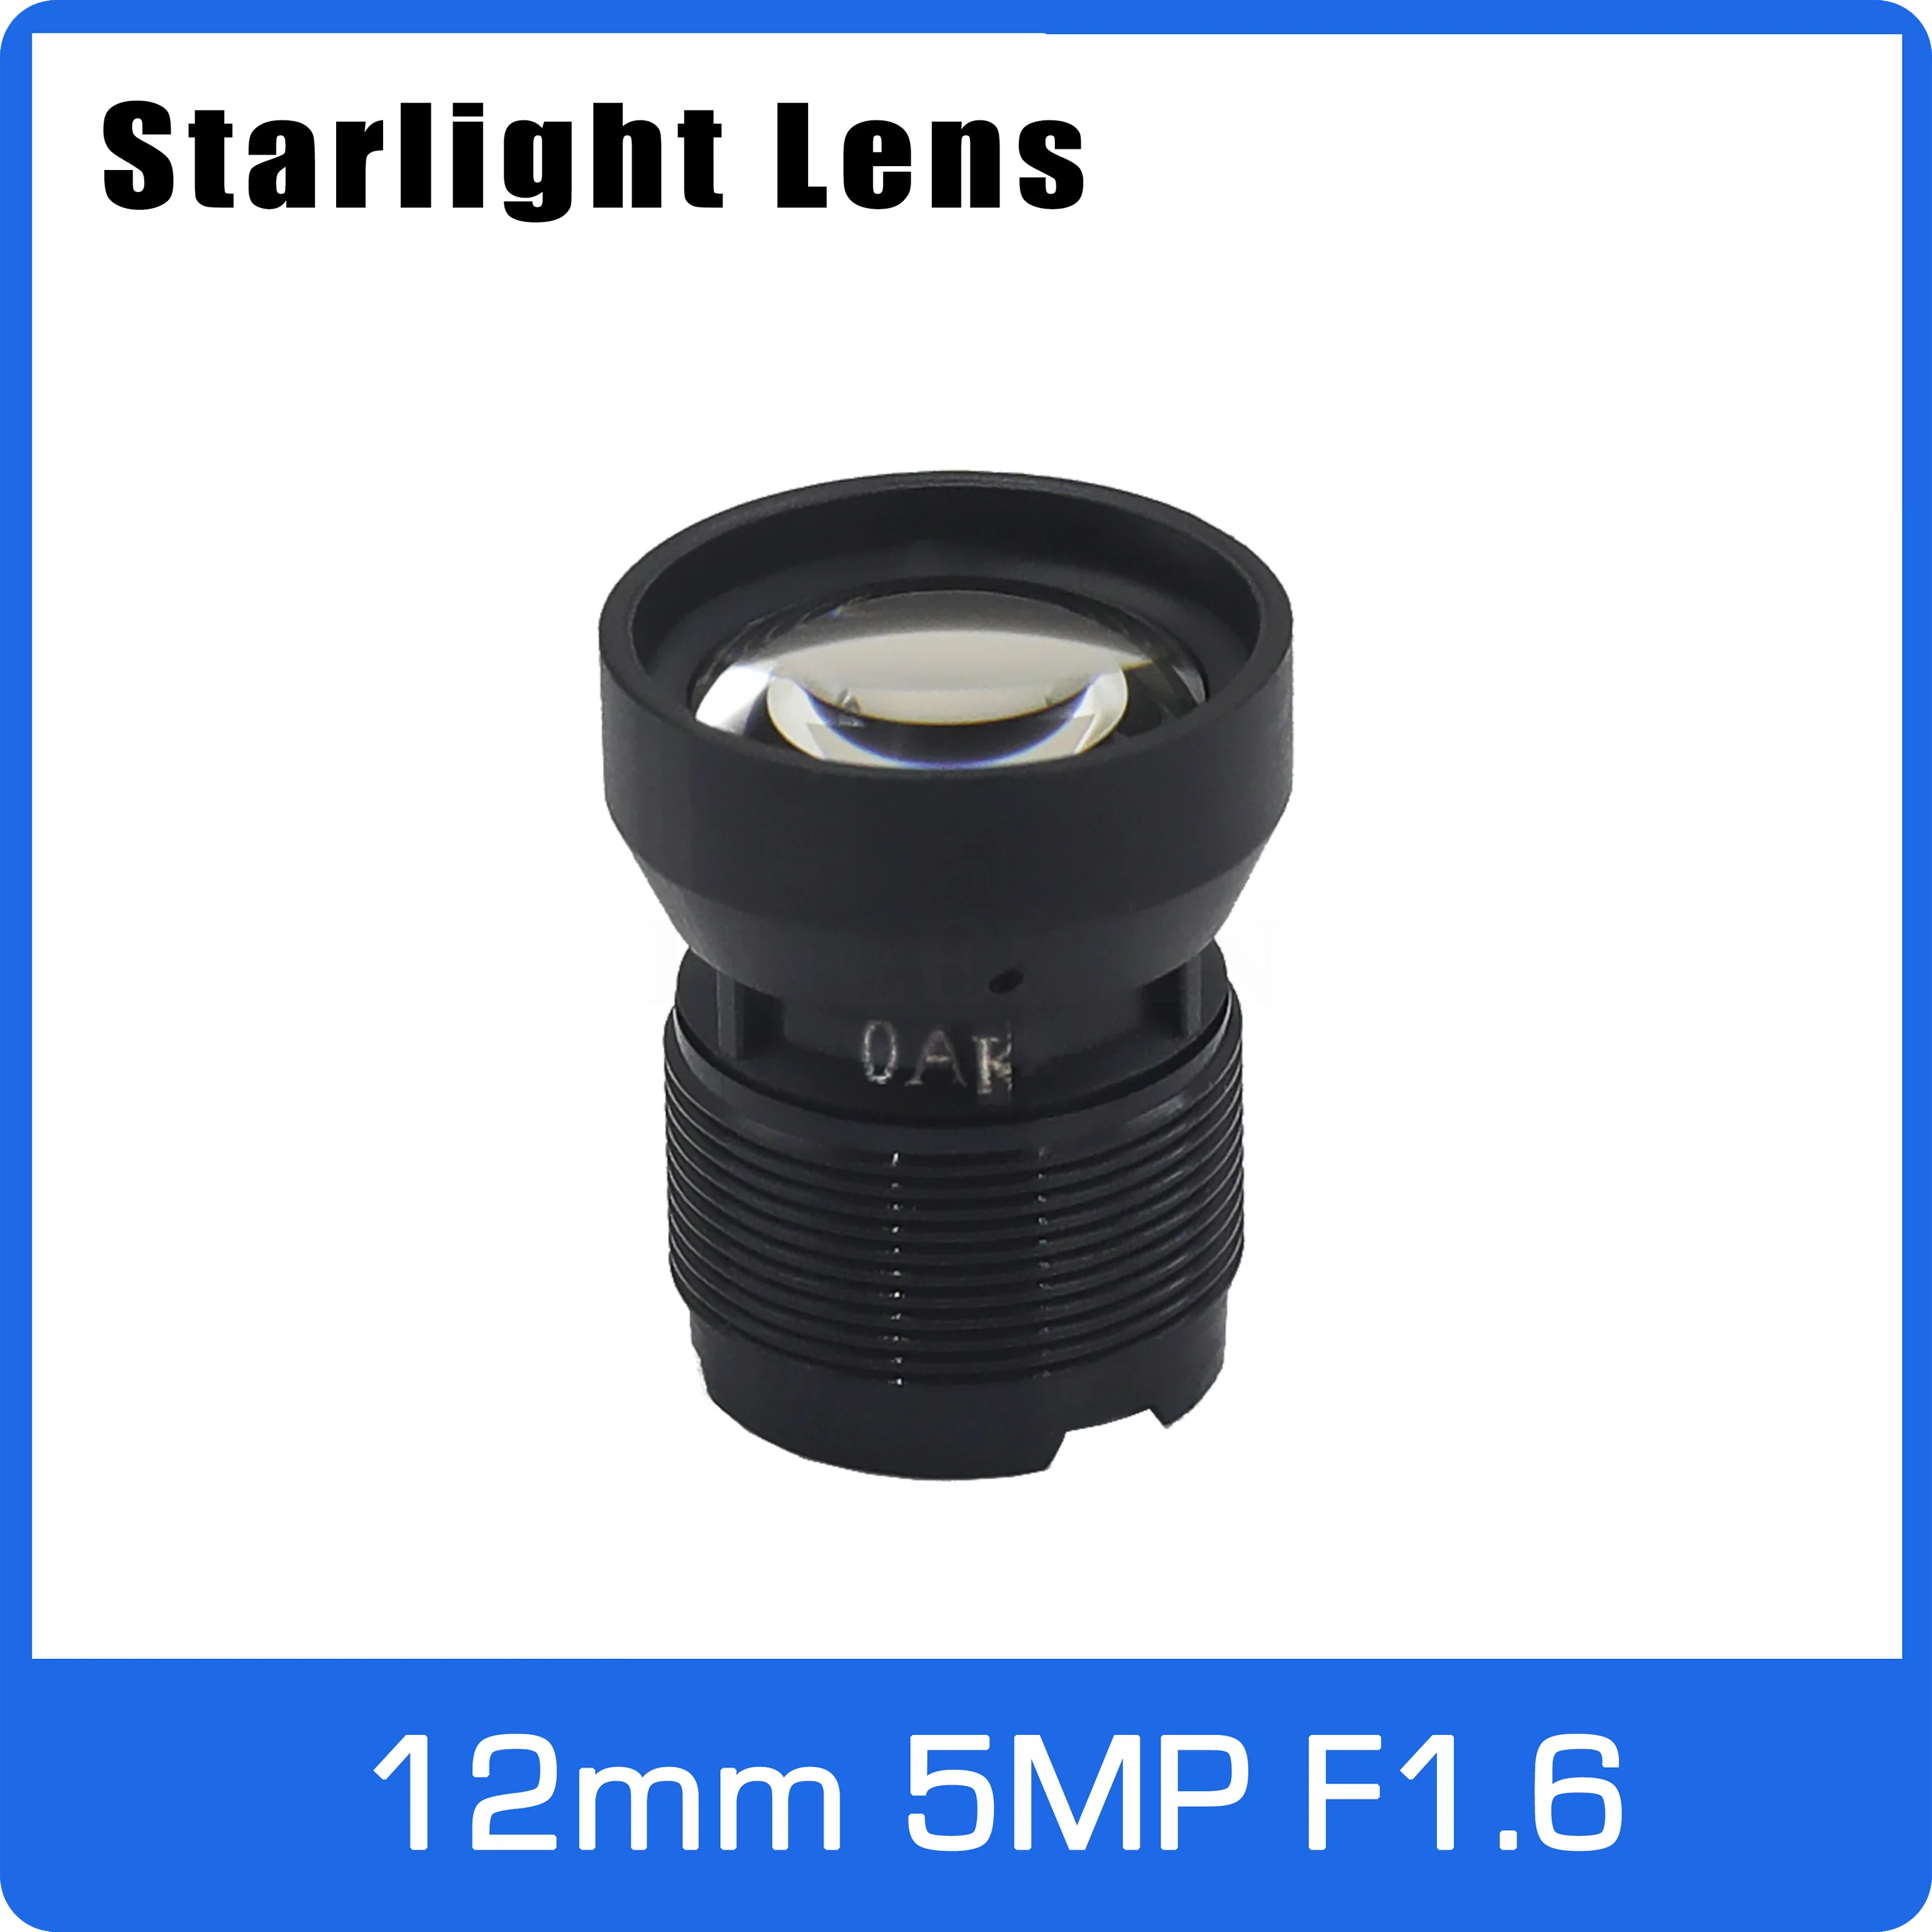 

Starlight Lens 5MP 12mm Fixed Aperture F1.6 Big Angle For SONY IMX290/291/307/327 Low Light CCTV AHD IP Camera Free Shipping